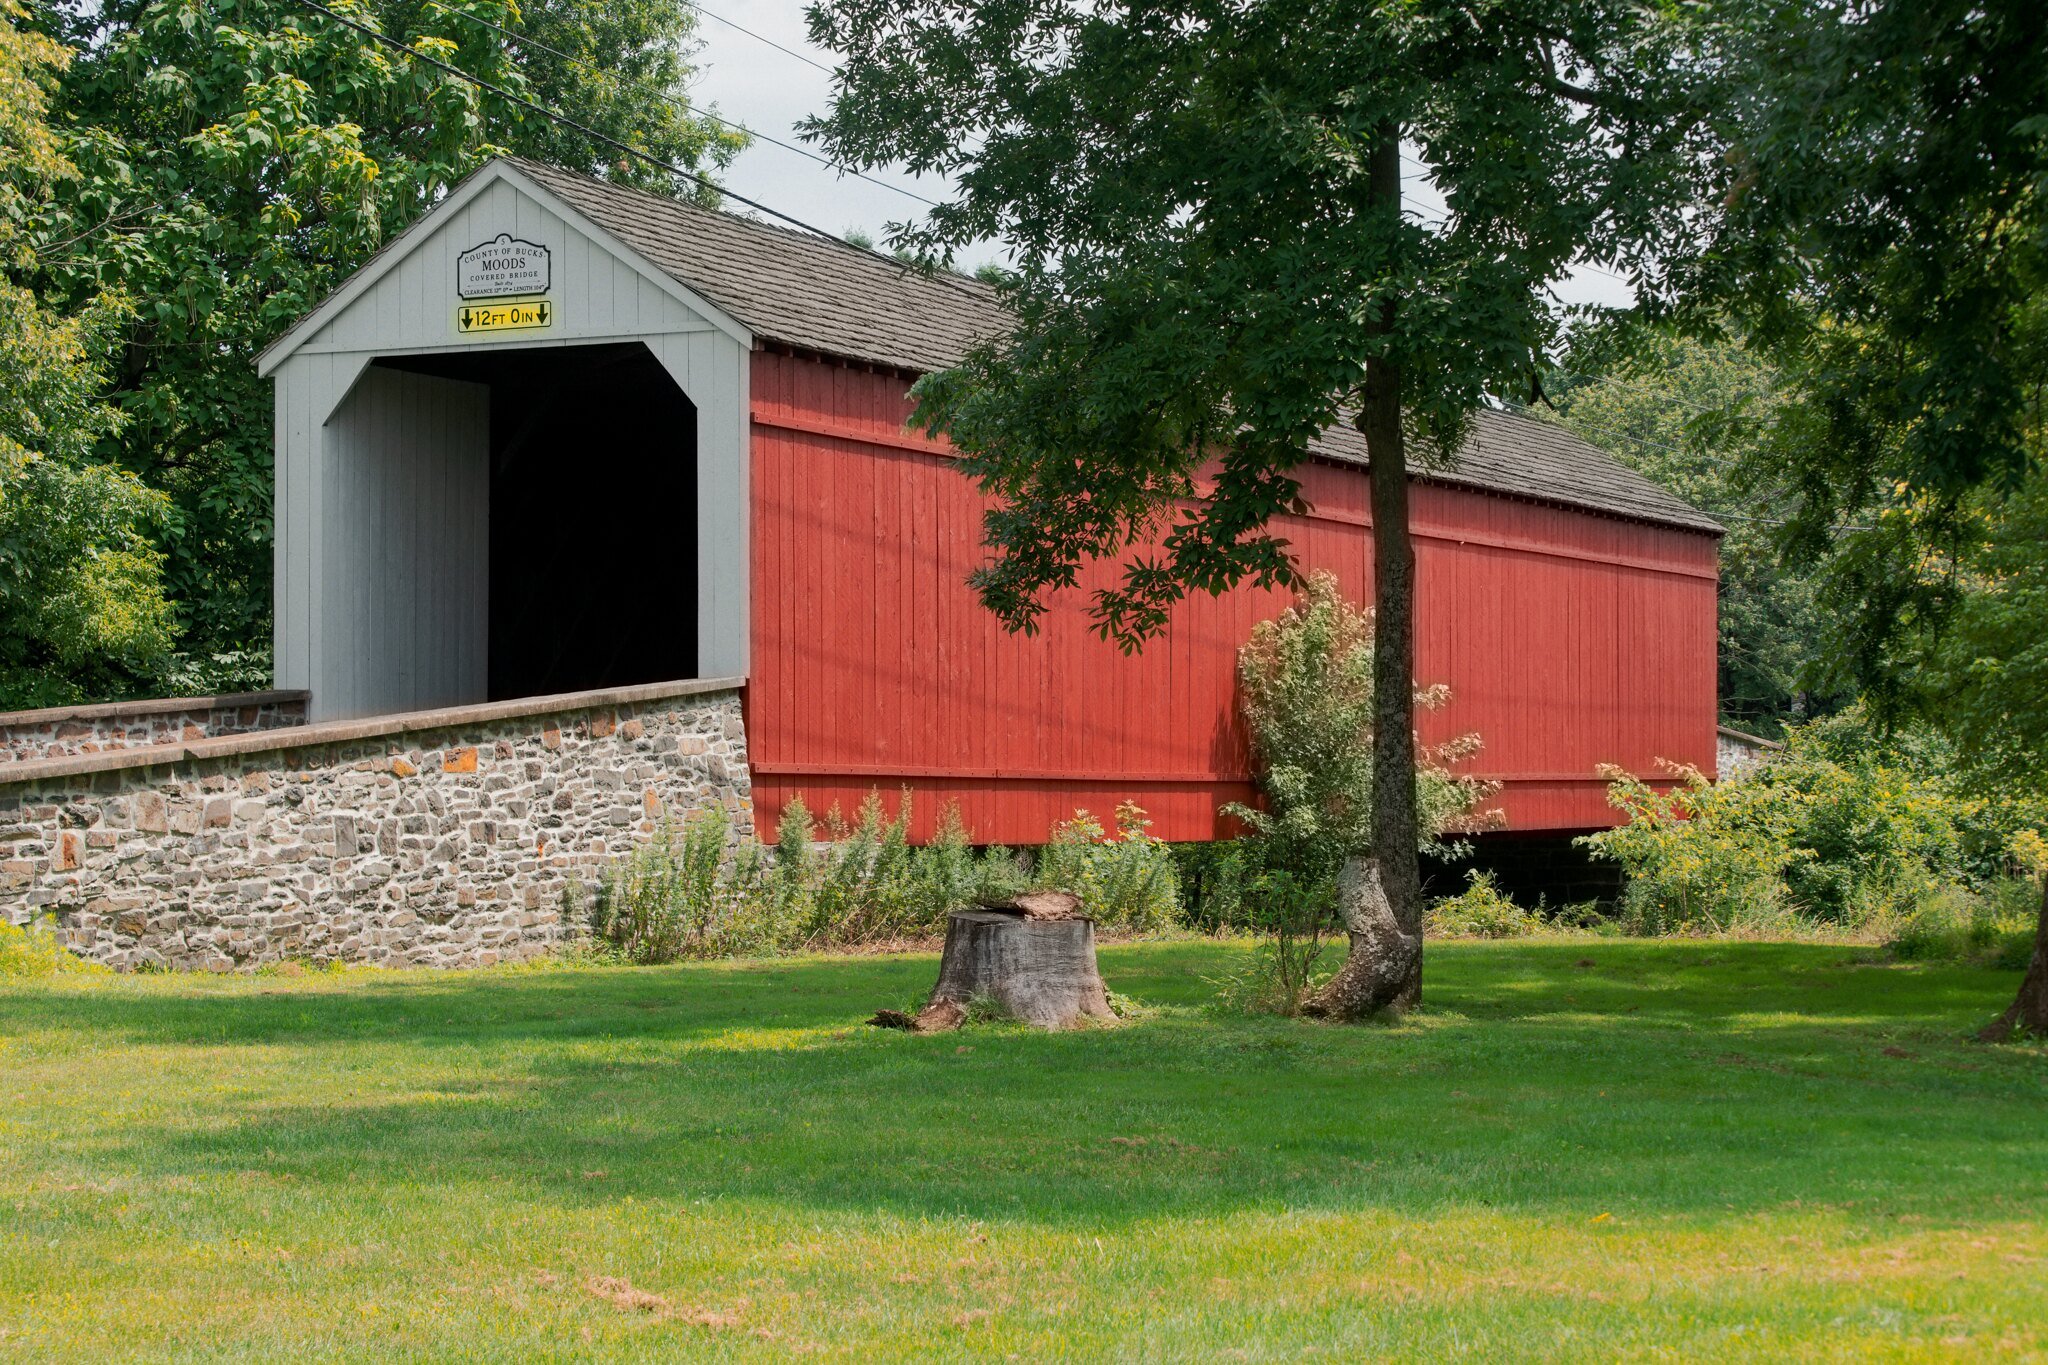  Moods Covered Bridge in East Rockhill Township in Bucks County, PA.  Built in 1874 and rebuilt in 2008 after arson destroyed the bridge in 2004. 